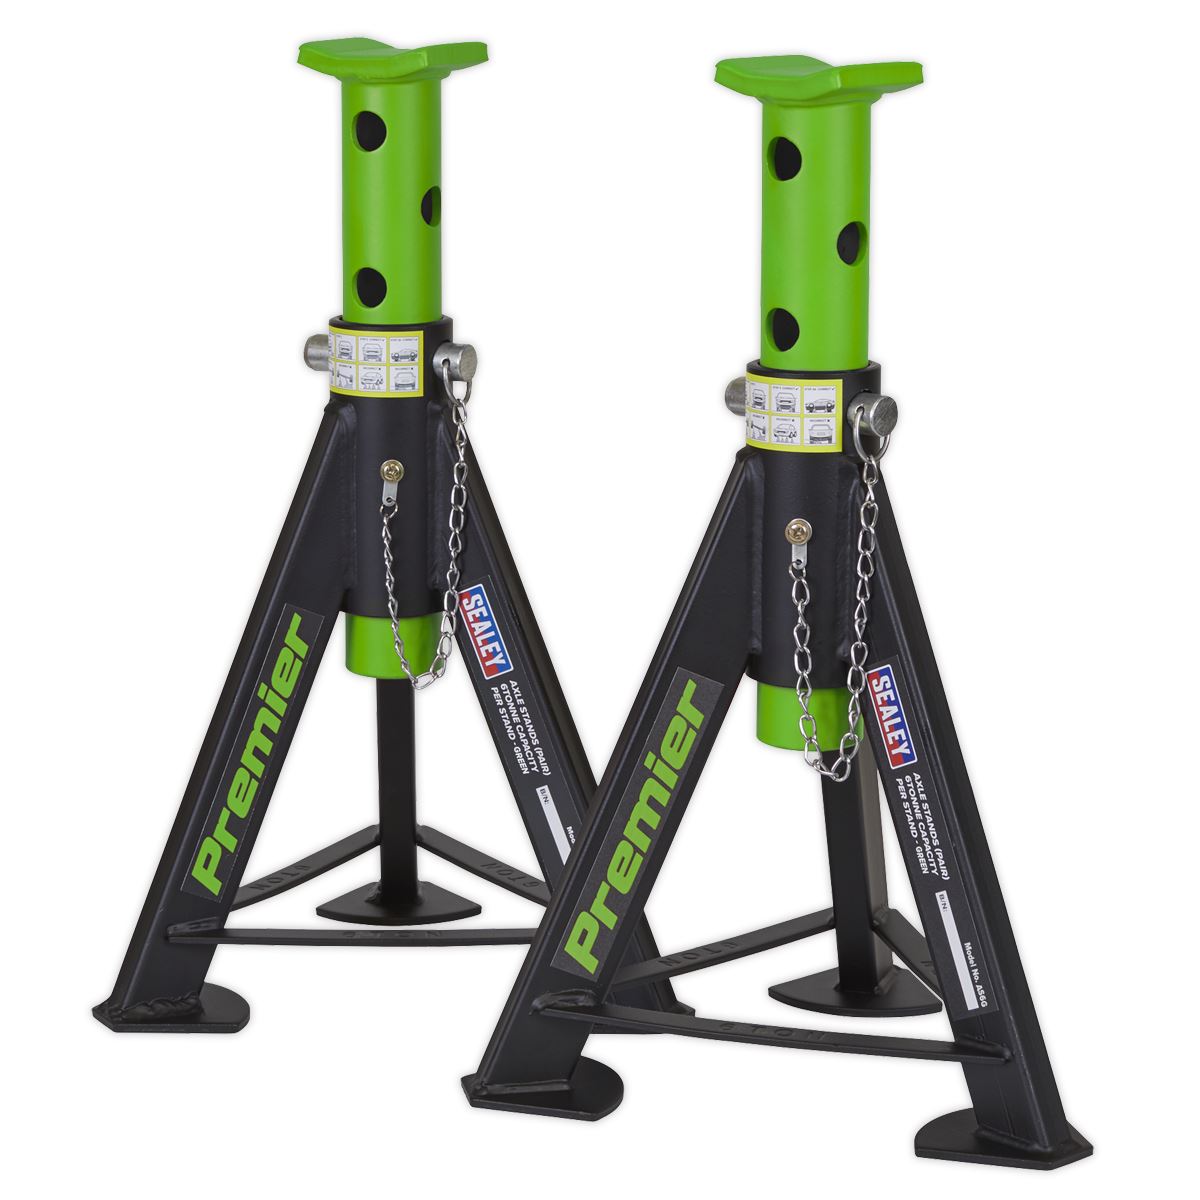 Sealey Premier Axle Stands (Pair) 6 Tonne Capacity per Stand - Green